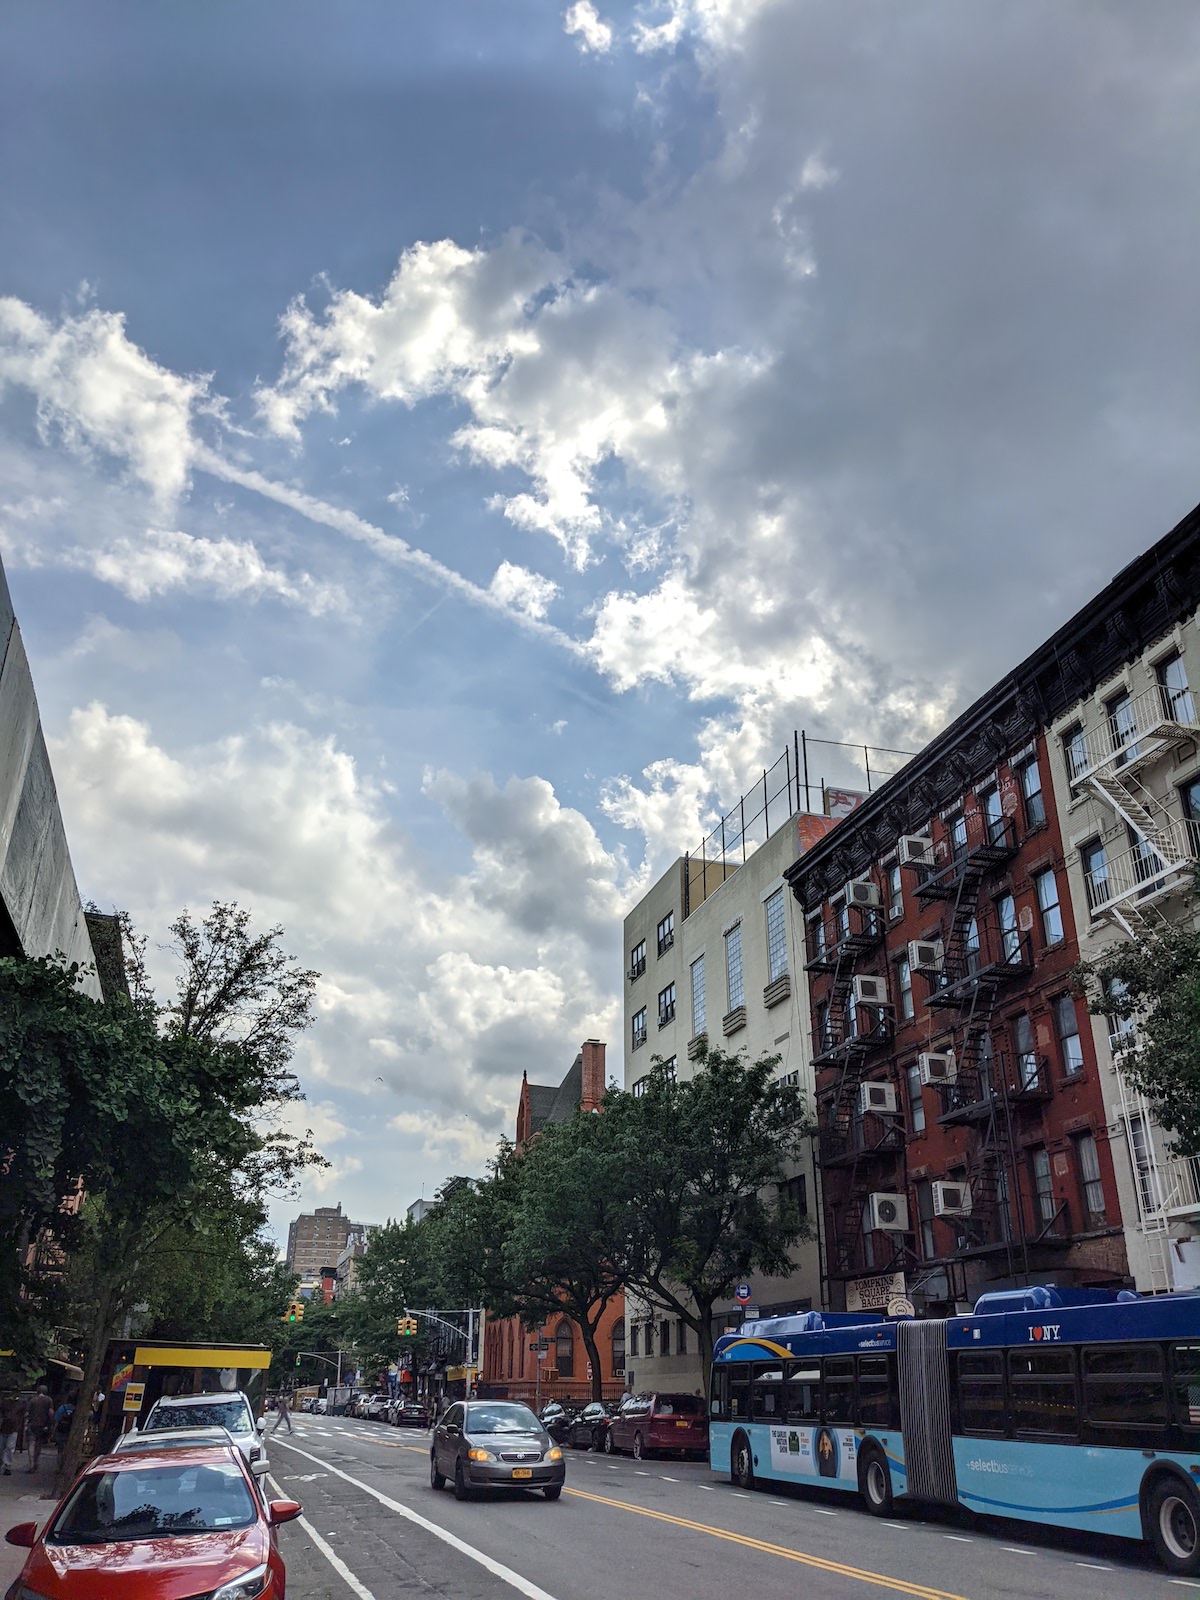 City street on a partly cloudy day